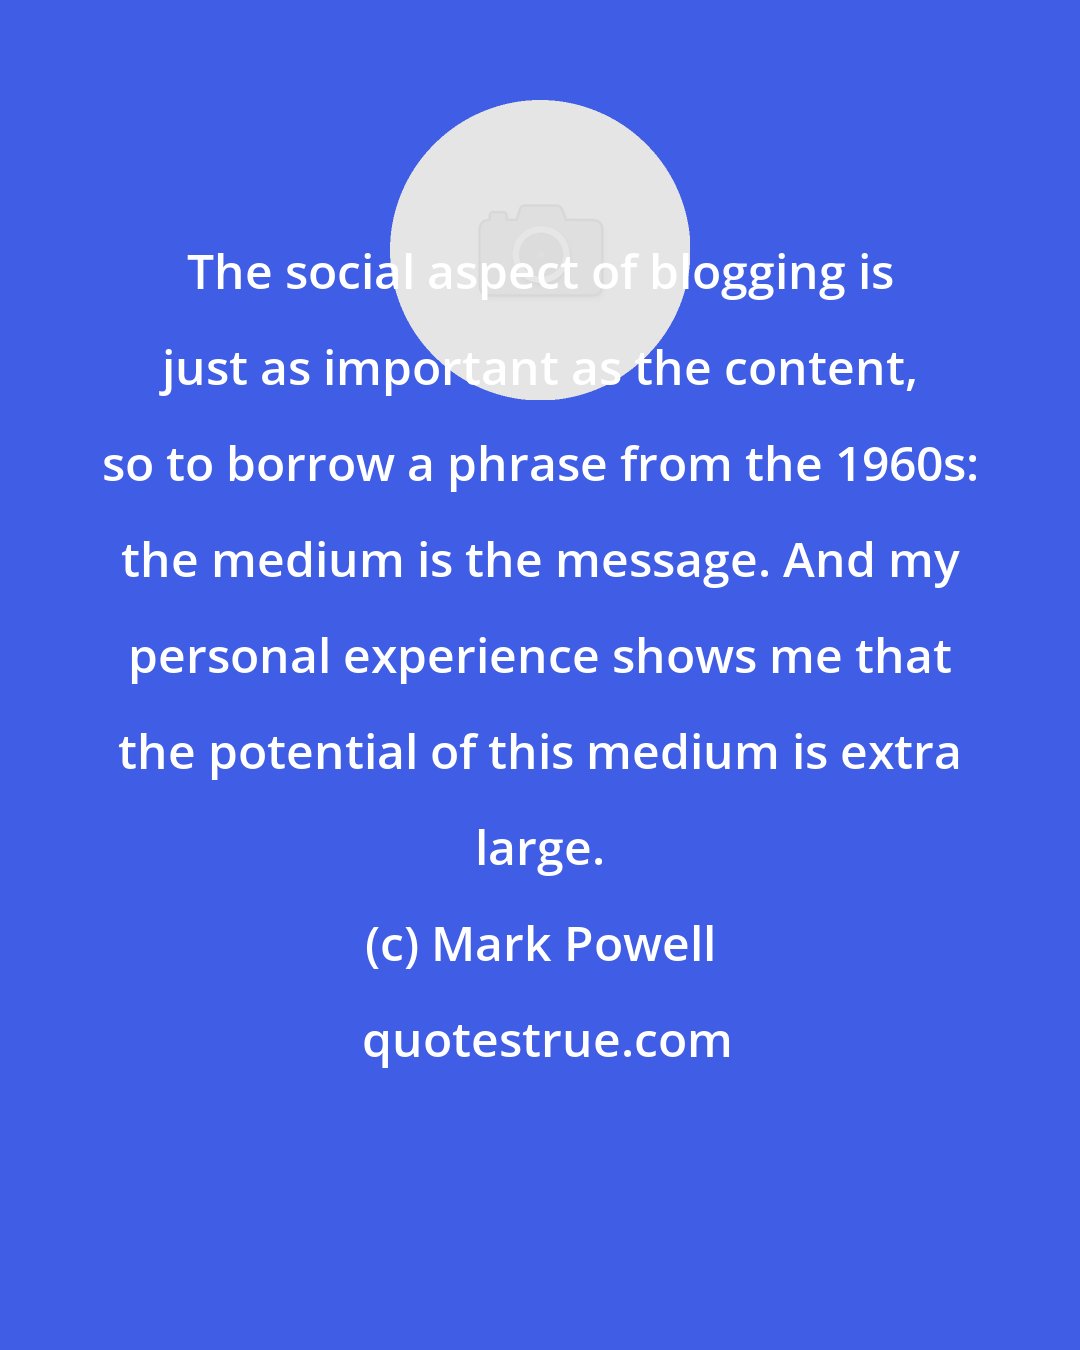 Mark Powell: The social aspect of blogging is just as important as the content, so to borrow a phrase from the 1960s: the medium is the message. And my personal experience shows me that the potential of this medium is extra large.